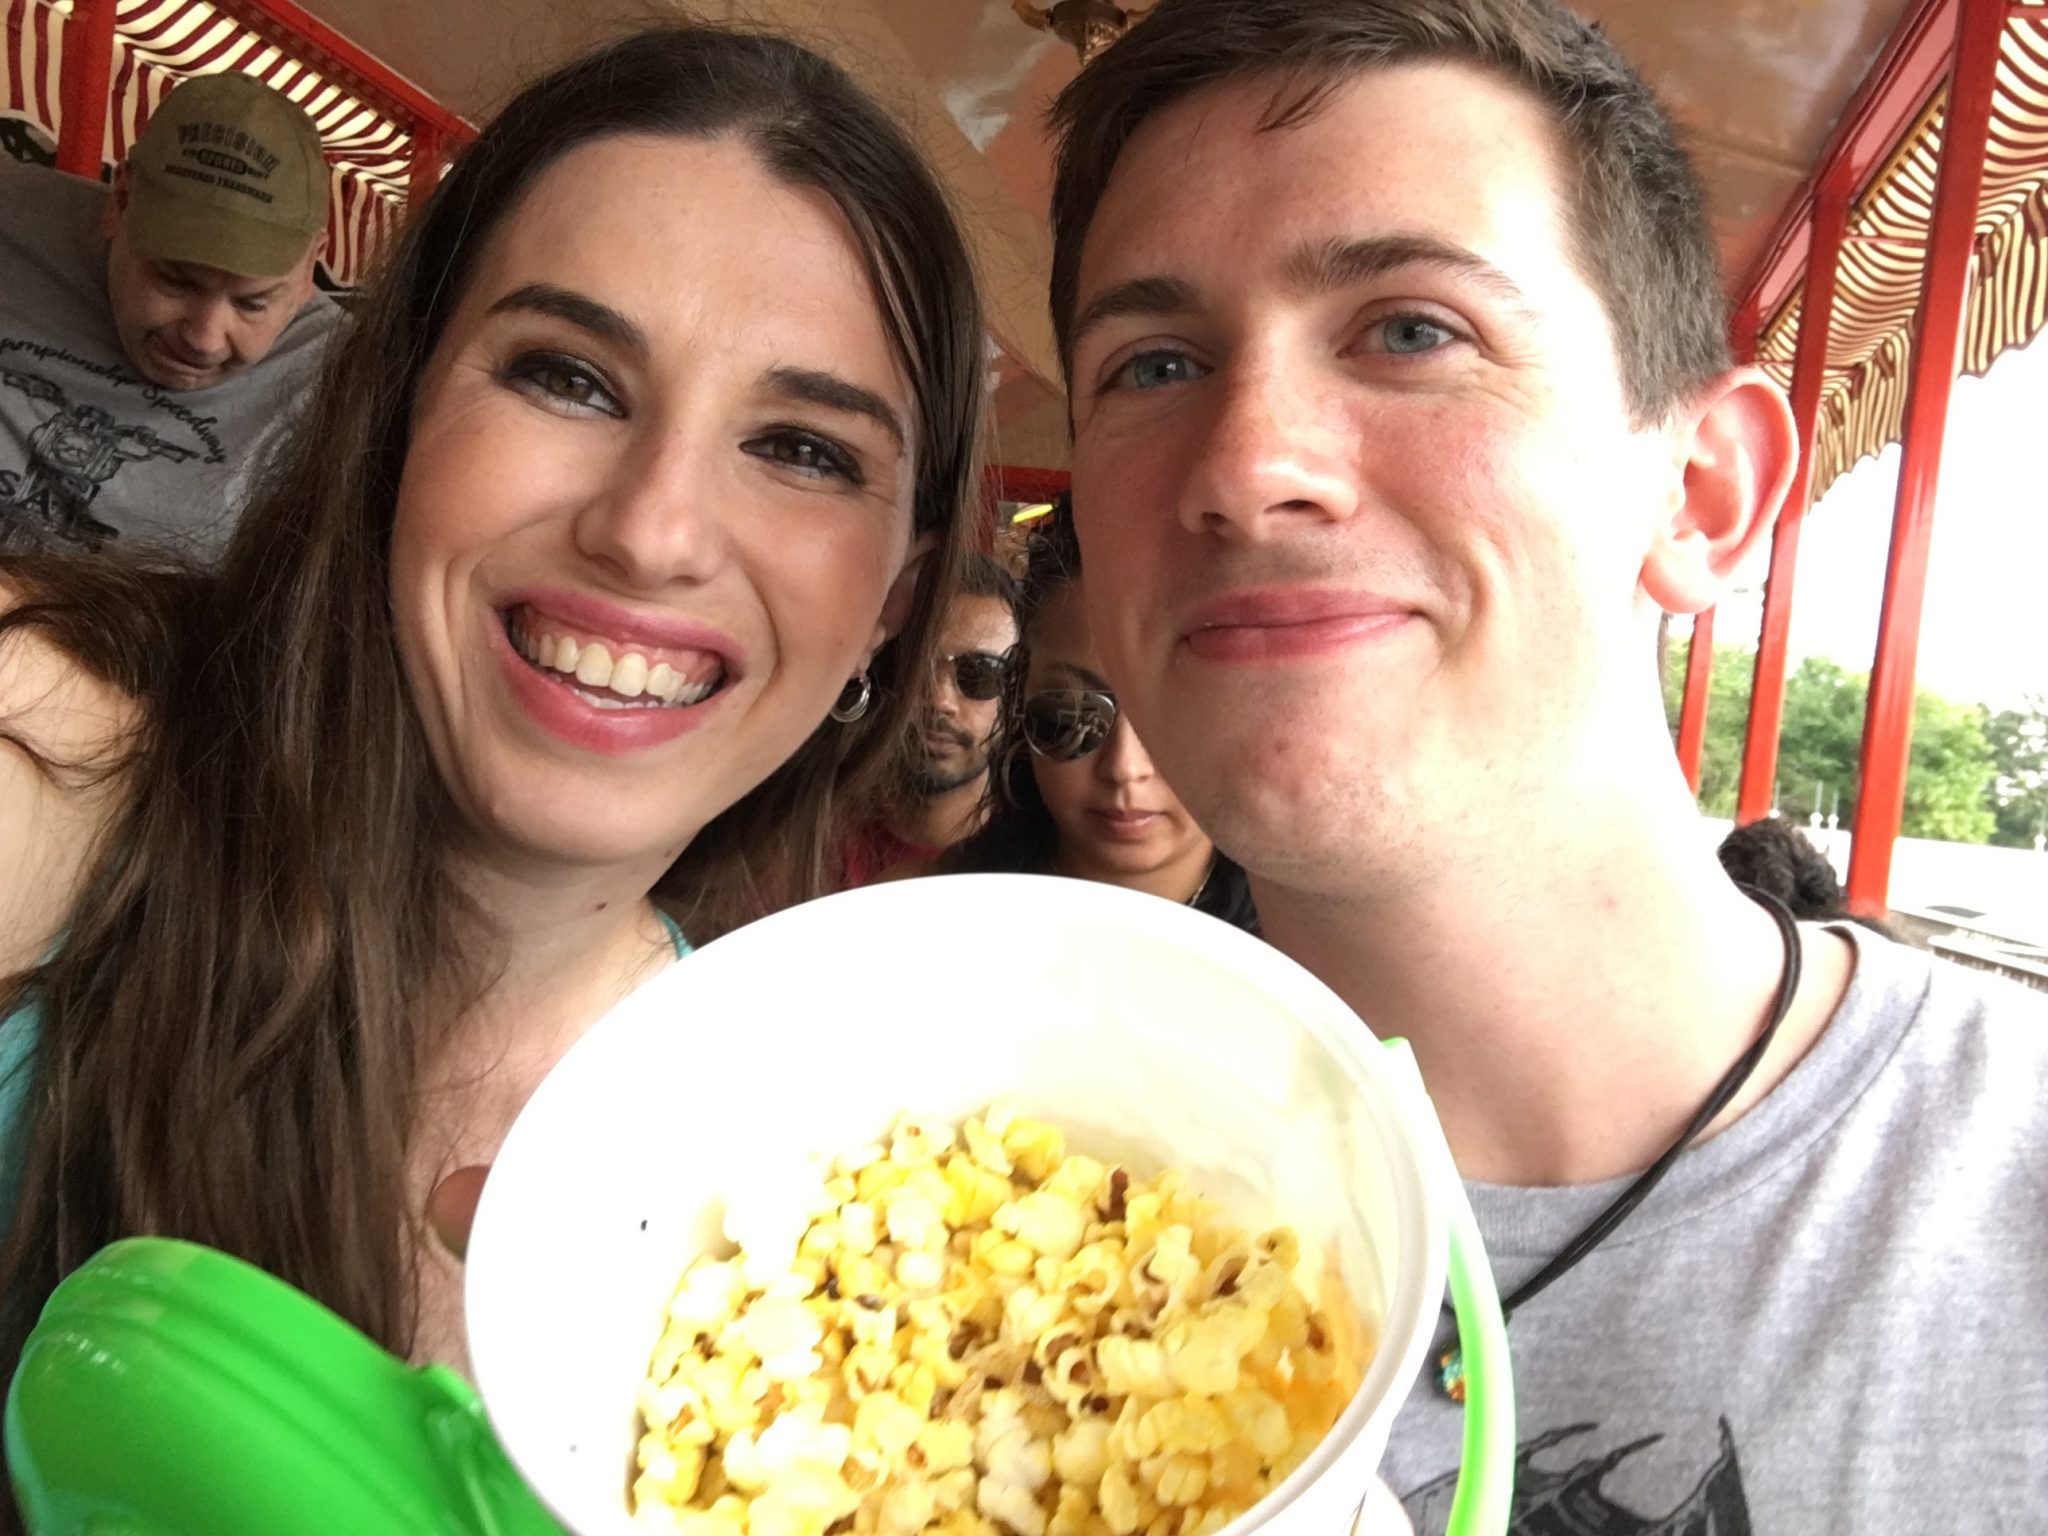 Chelsea and Robby on the Magic Kingdom train with Disney popcorn.